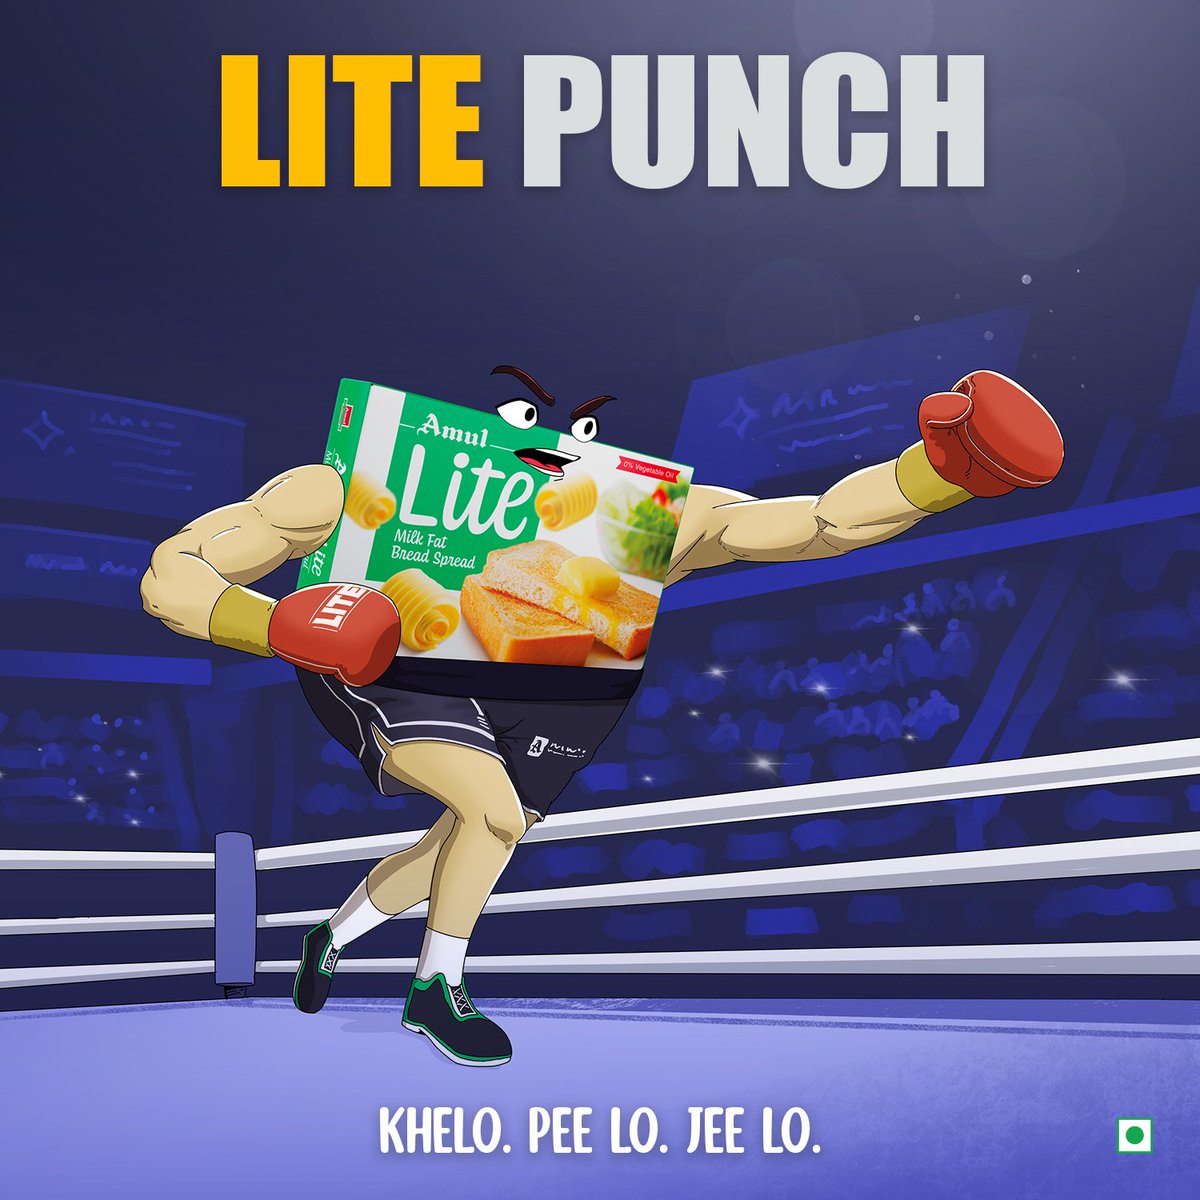 When life hits you in the gut, give it a solid punch back. Get back on your feet with Amul Lite Milk Fat Bread Spread.
#AmulIndia #AmulLite #CommonwealthGames